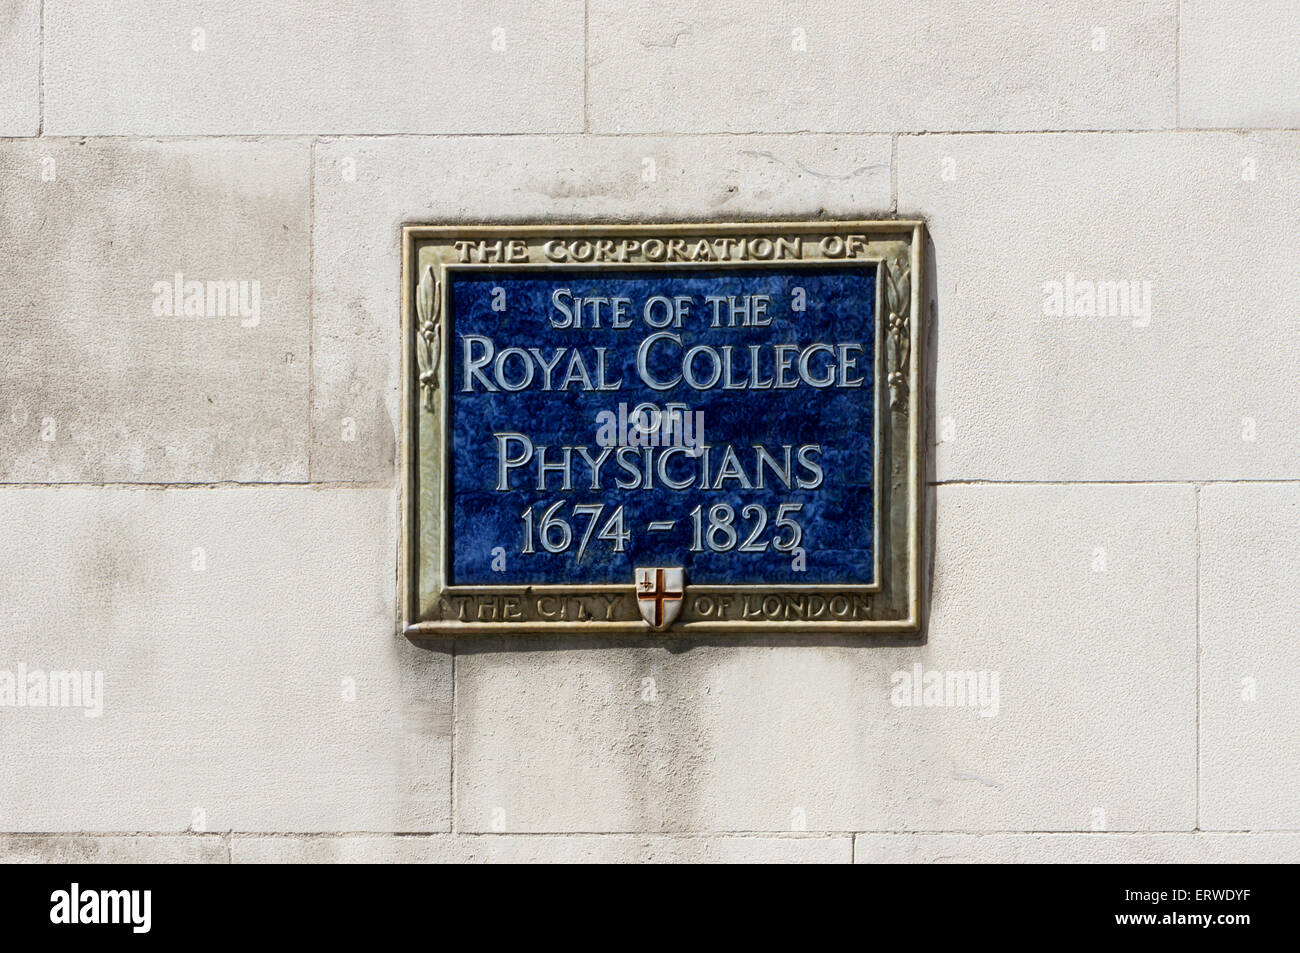 A plaque marks the site of the Royal College of Physicians in Warwick Lane, London. Stock Photo